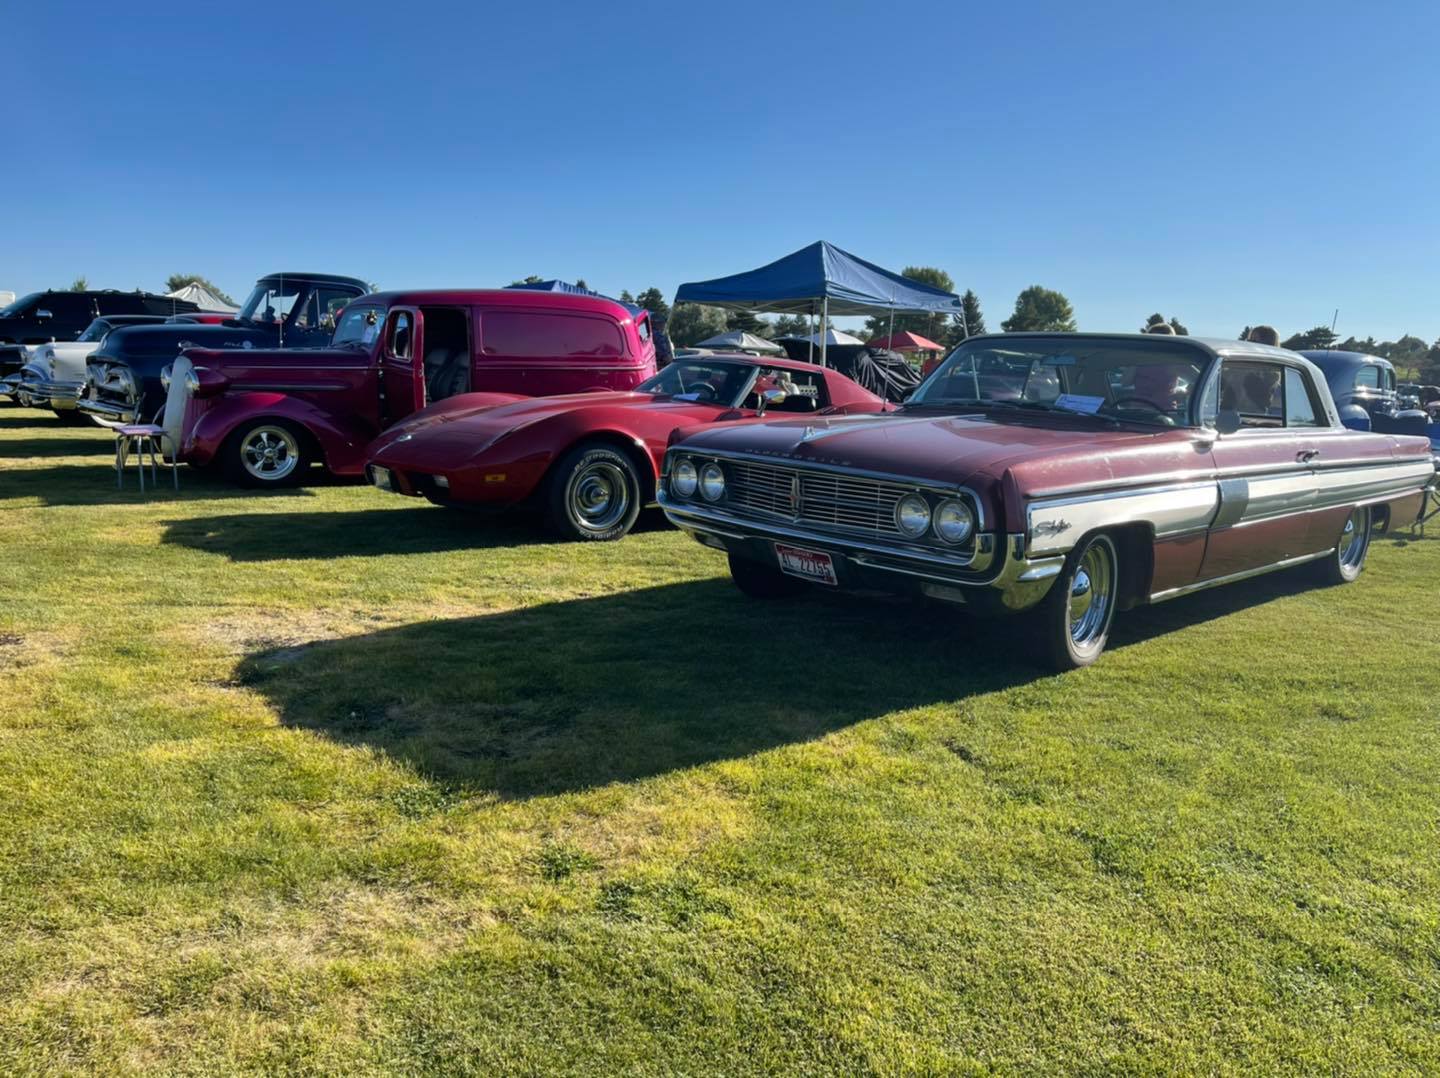 TOPDON Supports Fire Department's Car Show